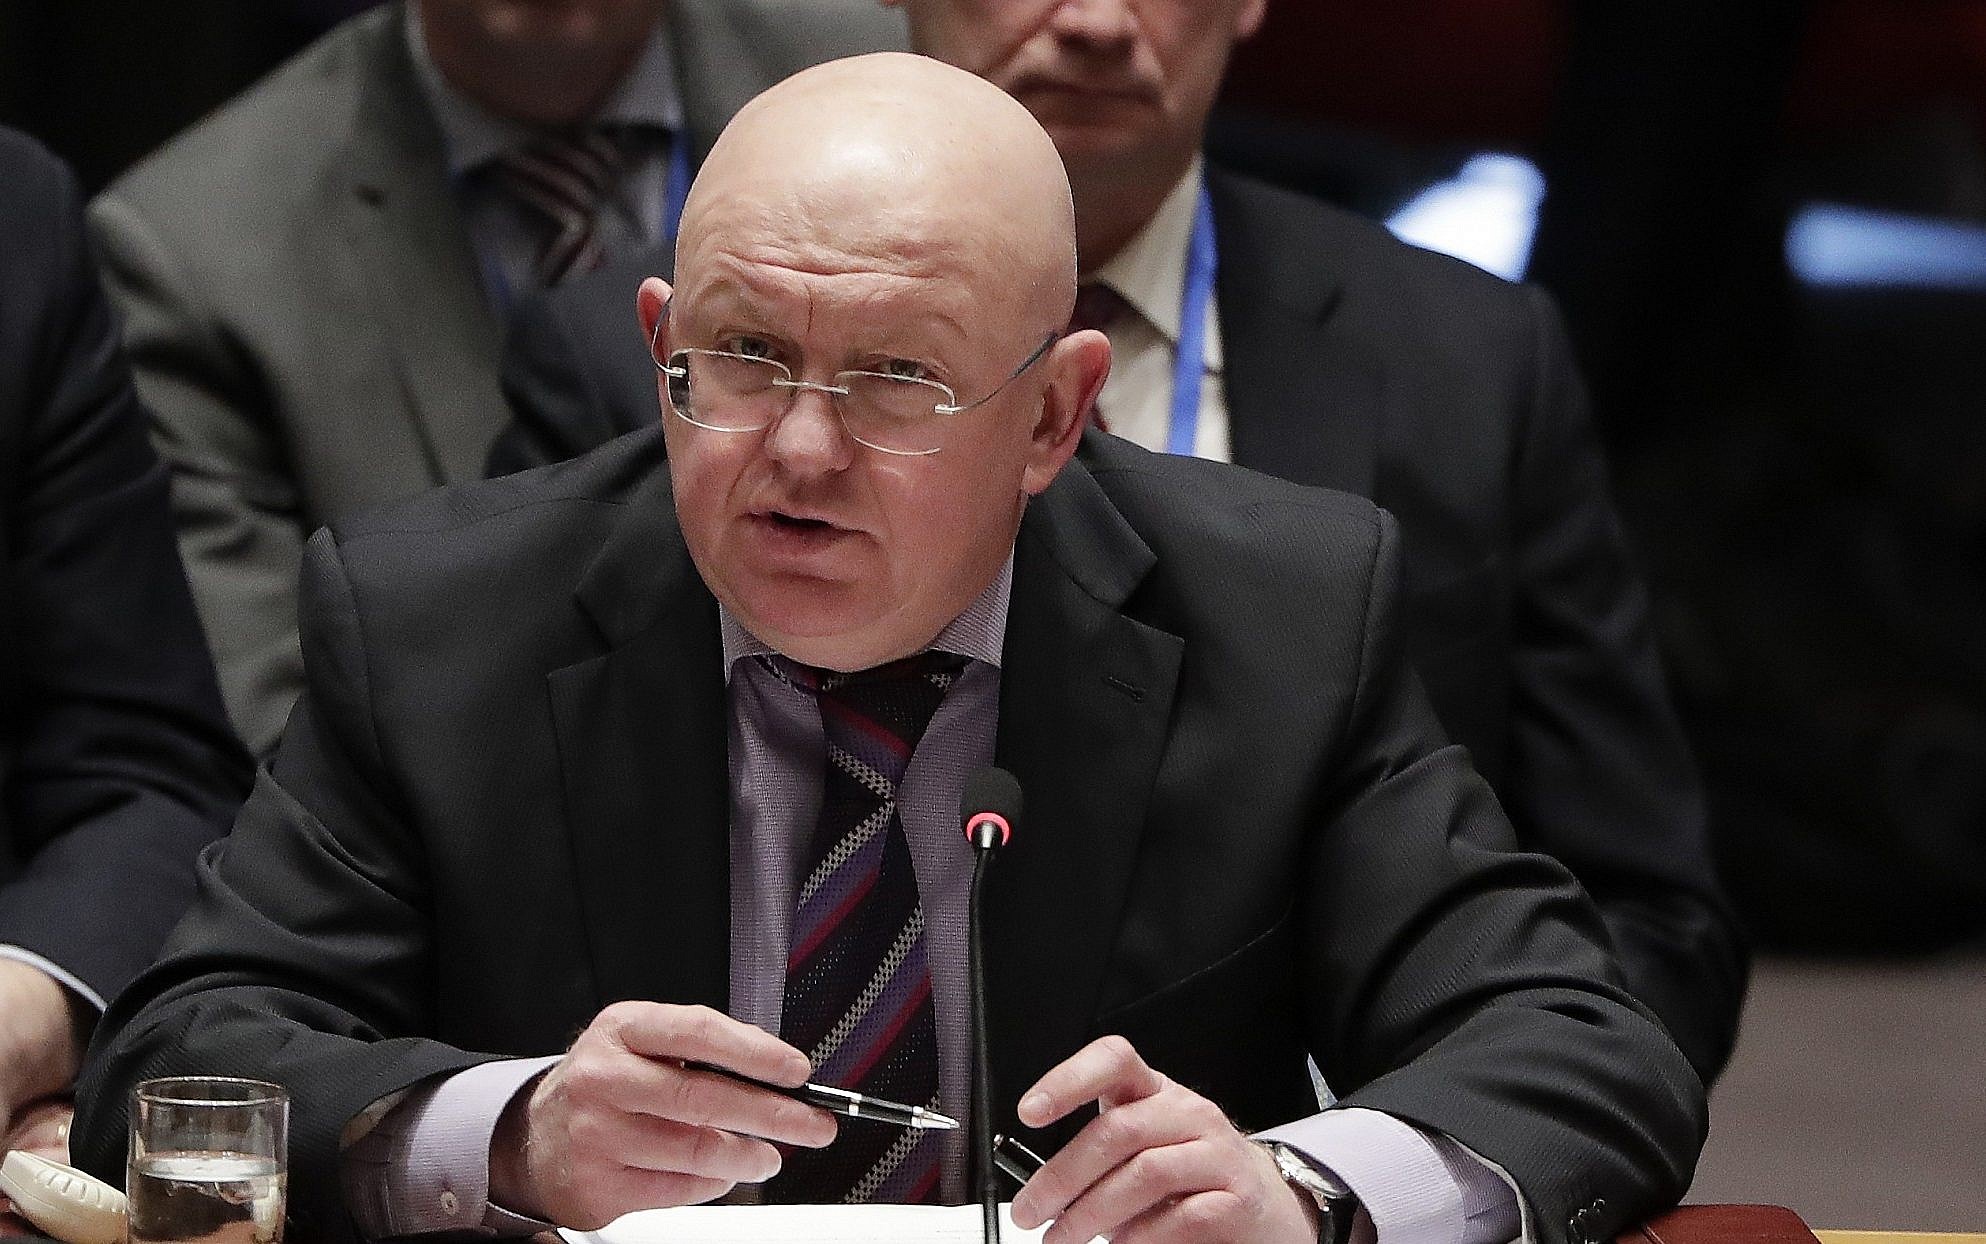 Russian Ambassador to the UN: Today's meeting is a parade of hypocrisy and double standards - VİDEO